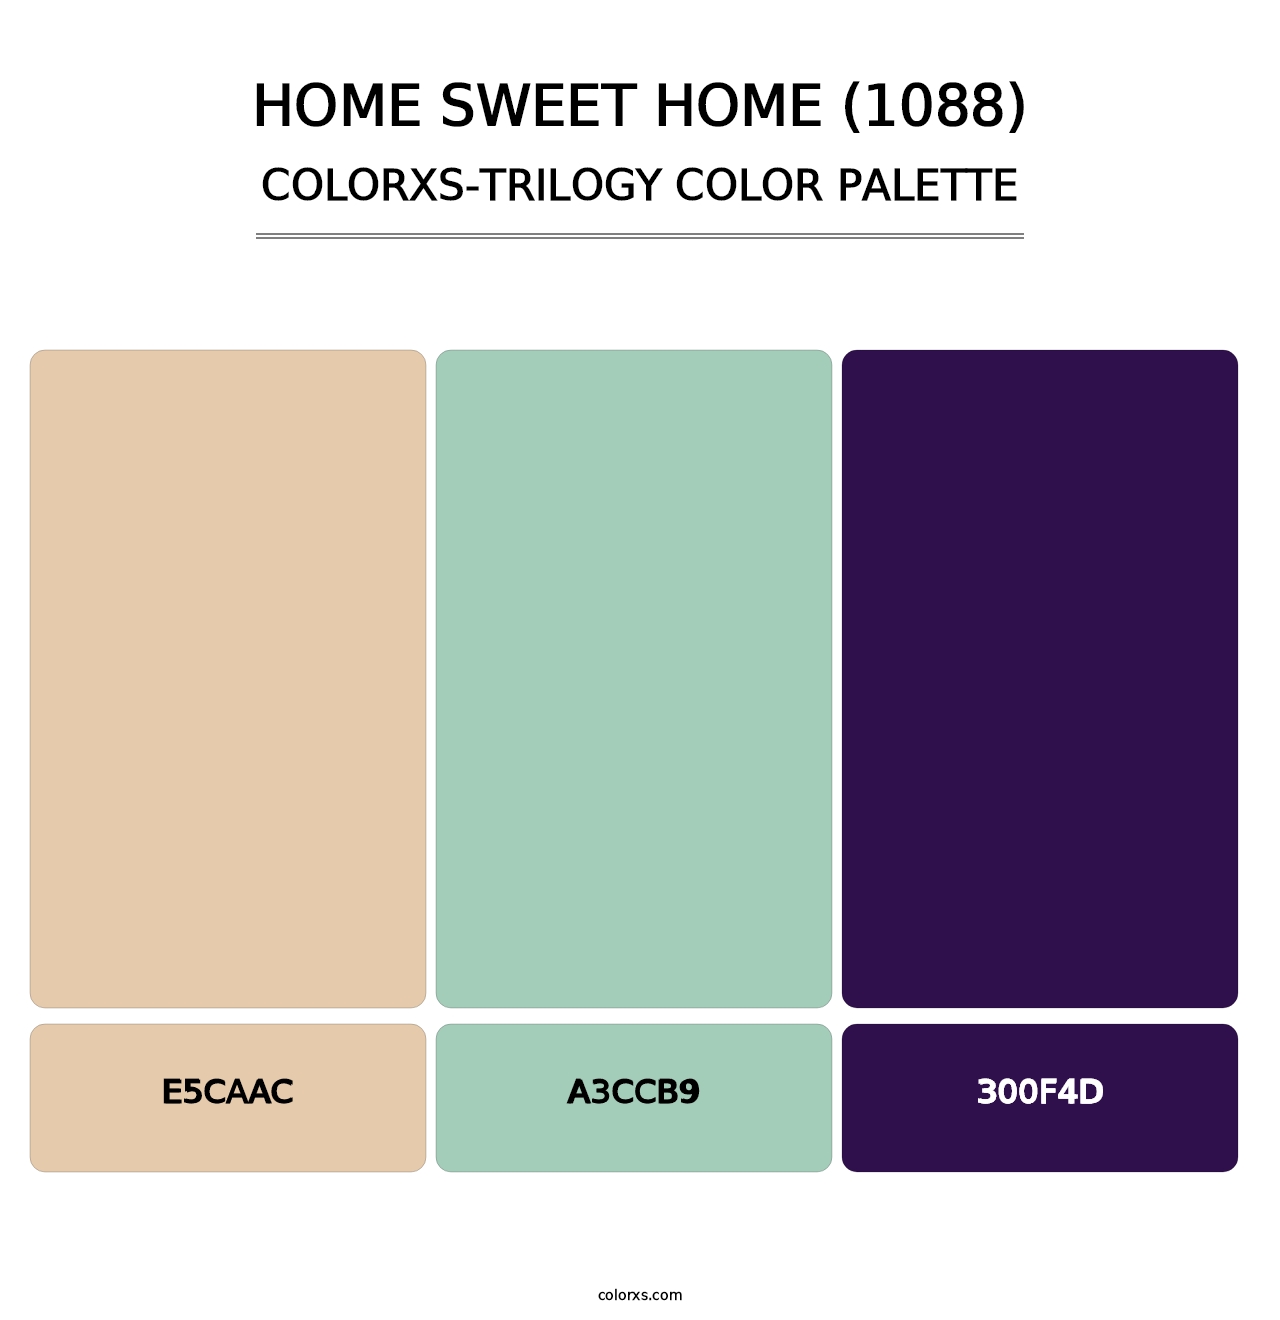 Home Sweet Home (1088) - Colorxs Trilogy Palette